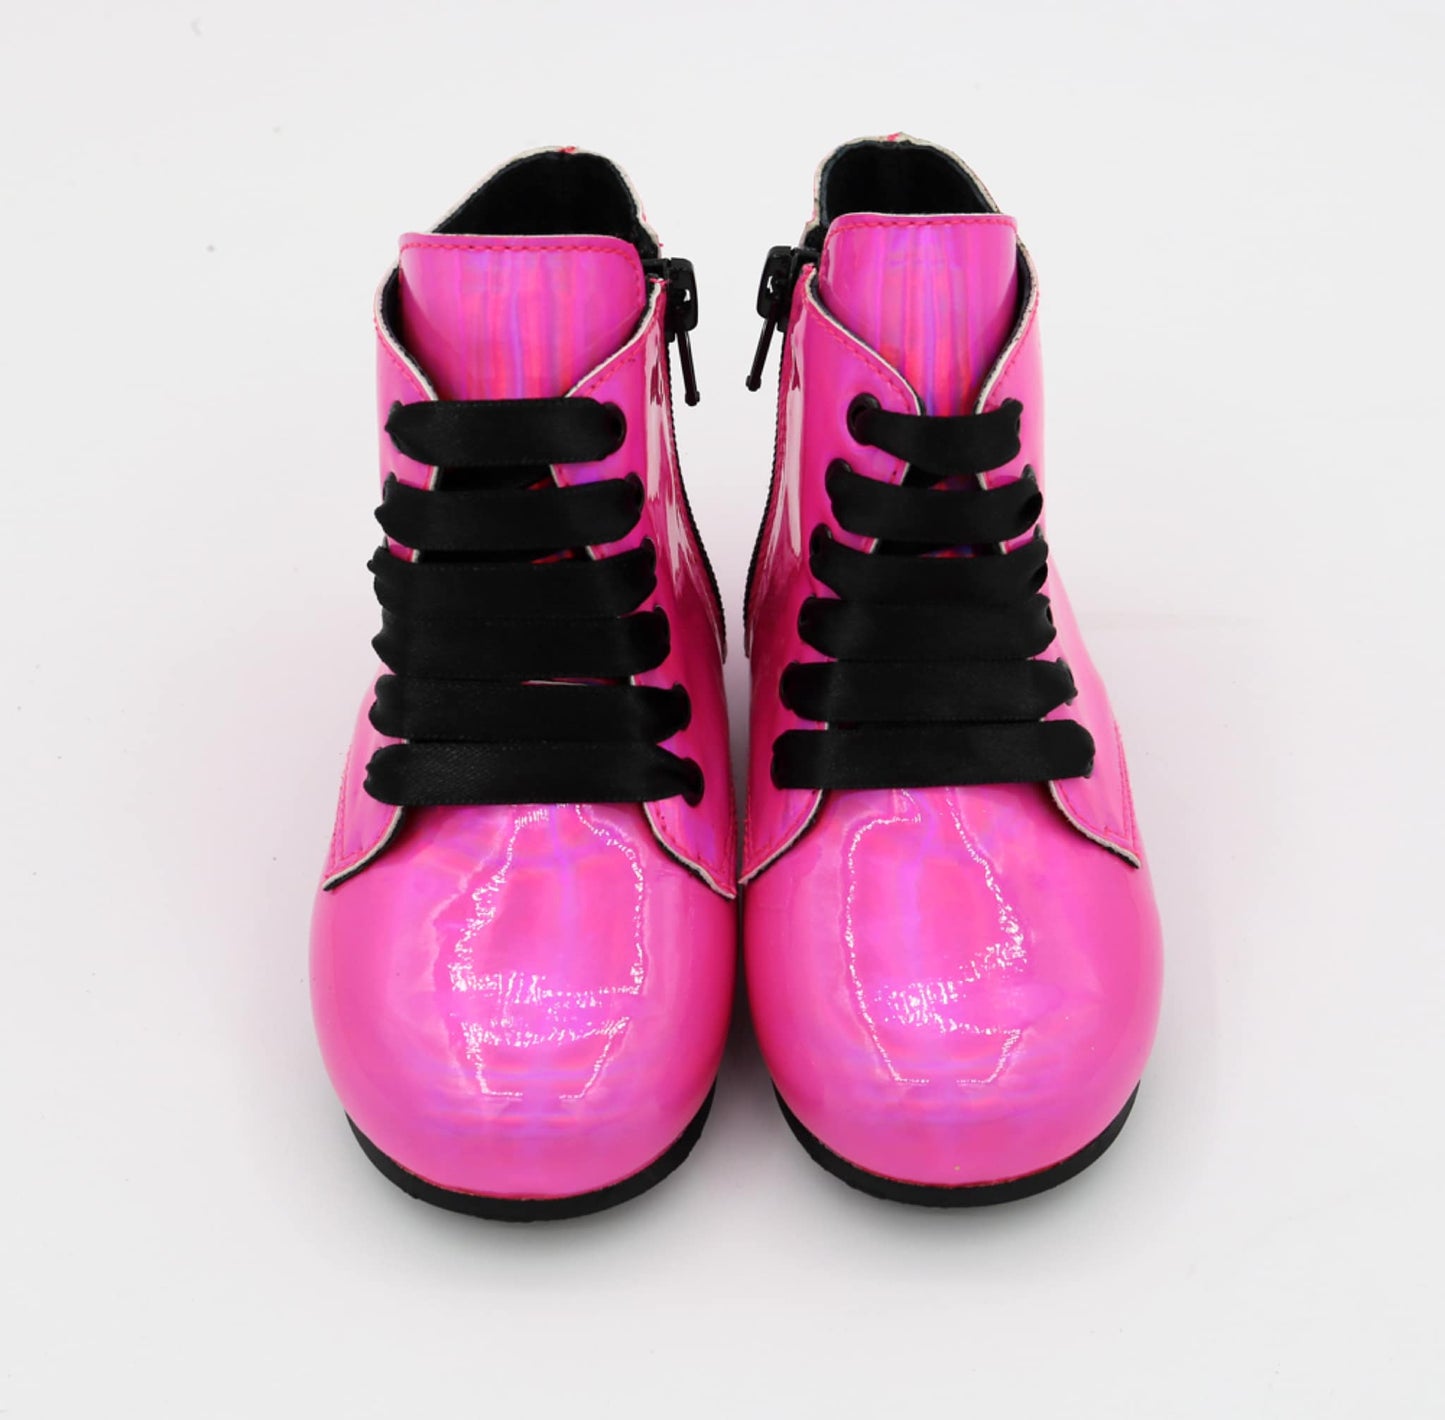 Punk Doll Pink Hologram Nyx Boots + Ribbon Laces + Booties